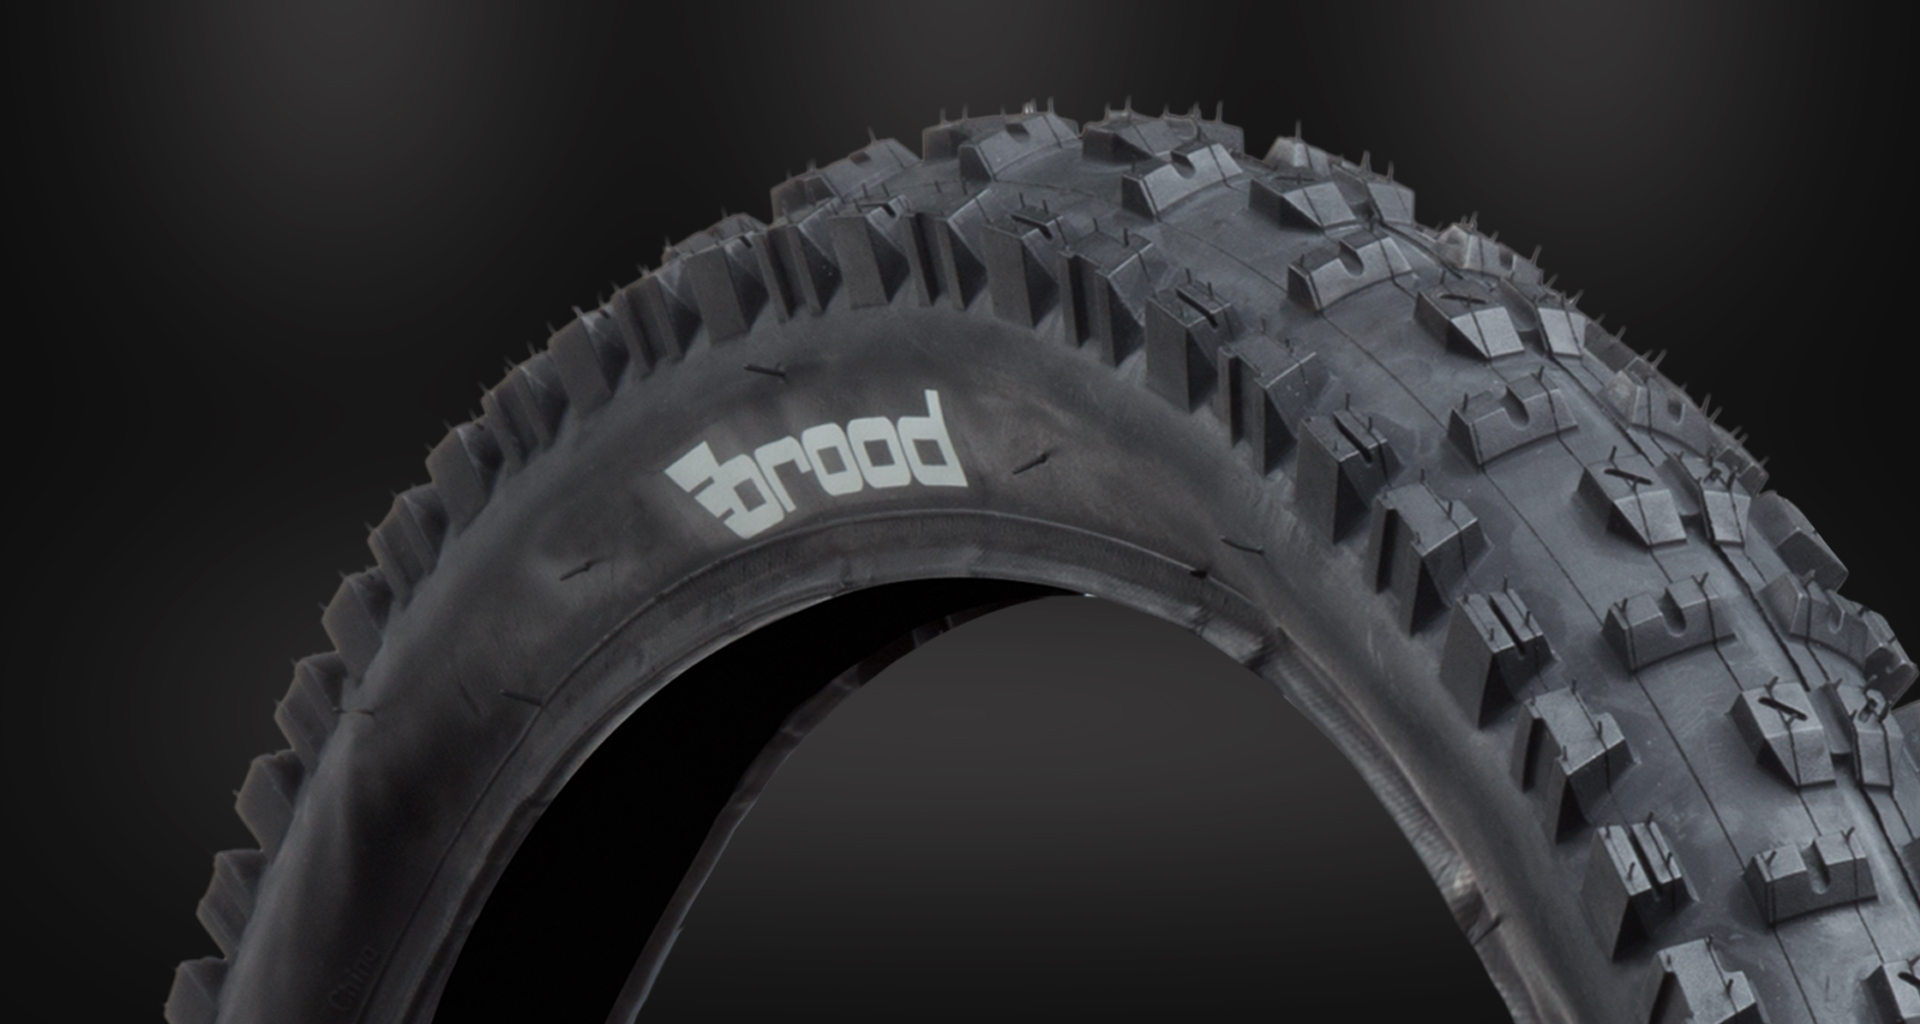 Brood Maxtion 22" x 2.30" Tubeless Ready Tire